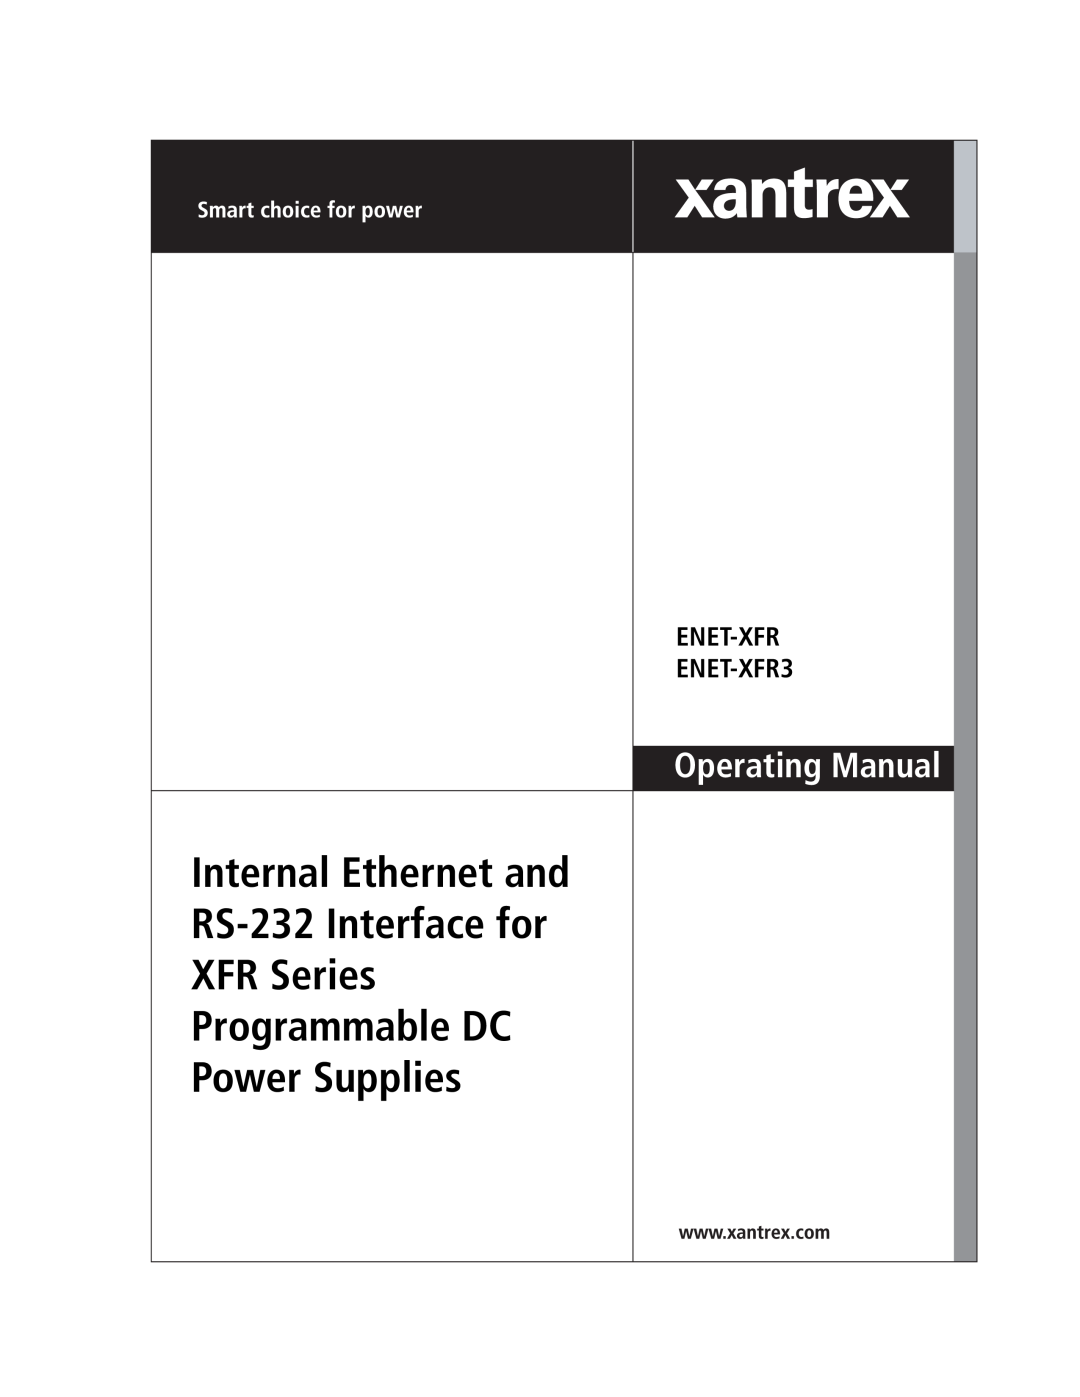 Xantrex Technology ENET-XFR manual Internal Ethernet and RS-232 Interface for XFR Series Programmable DC, Power Supplies 